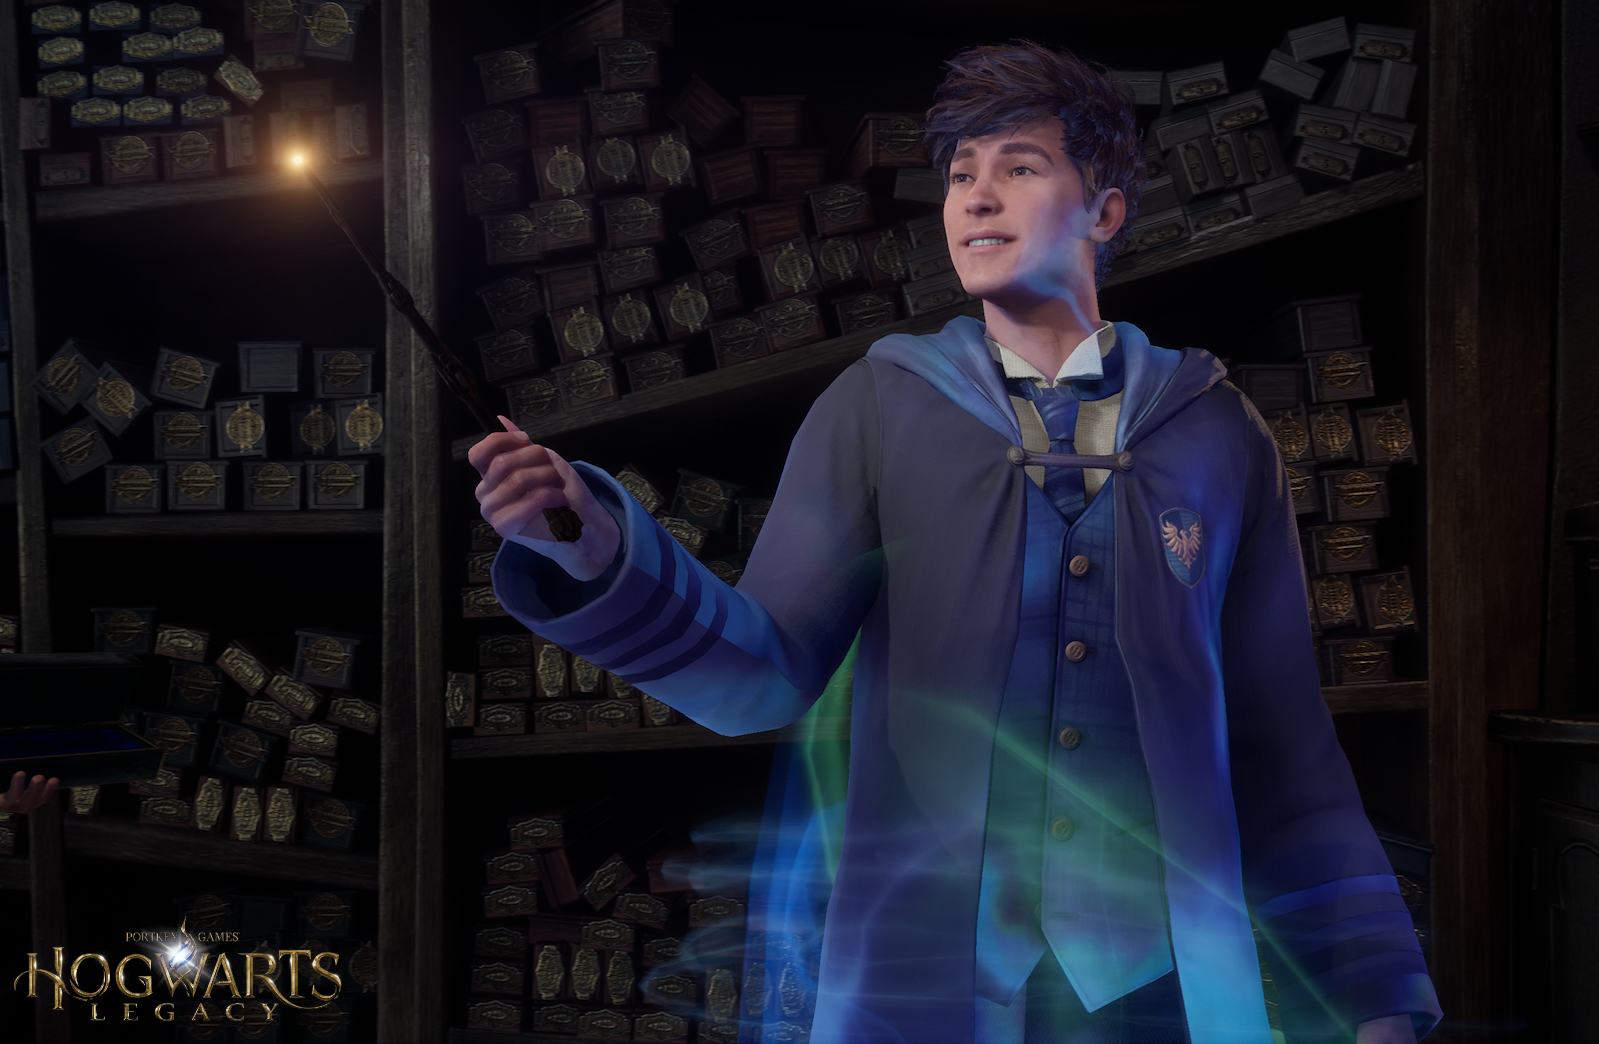 Get Your Wand and Join the Fun: Hogwarts Legacy on GTX 1080